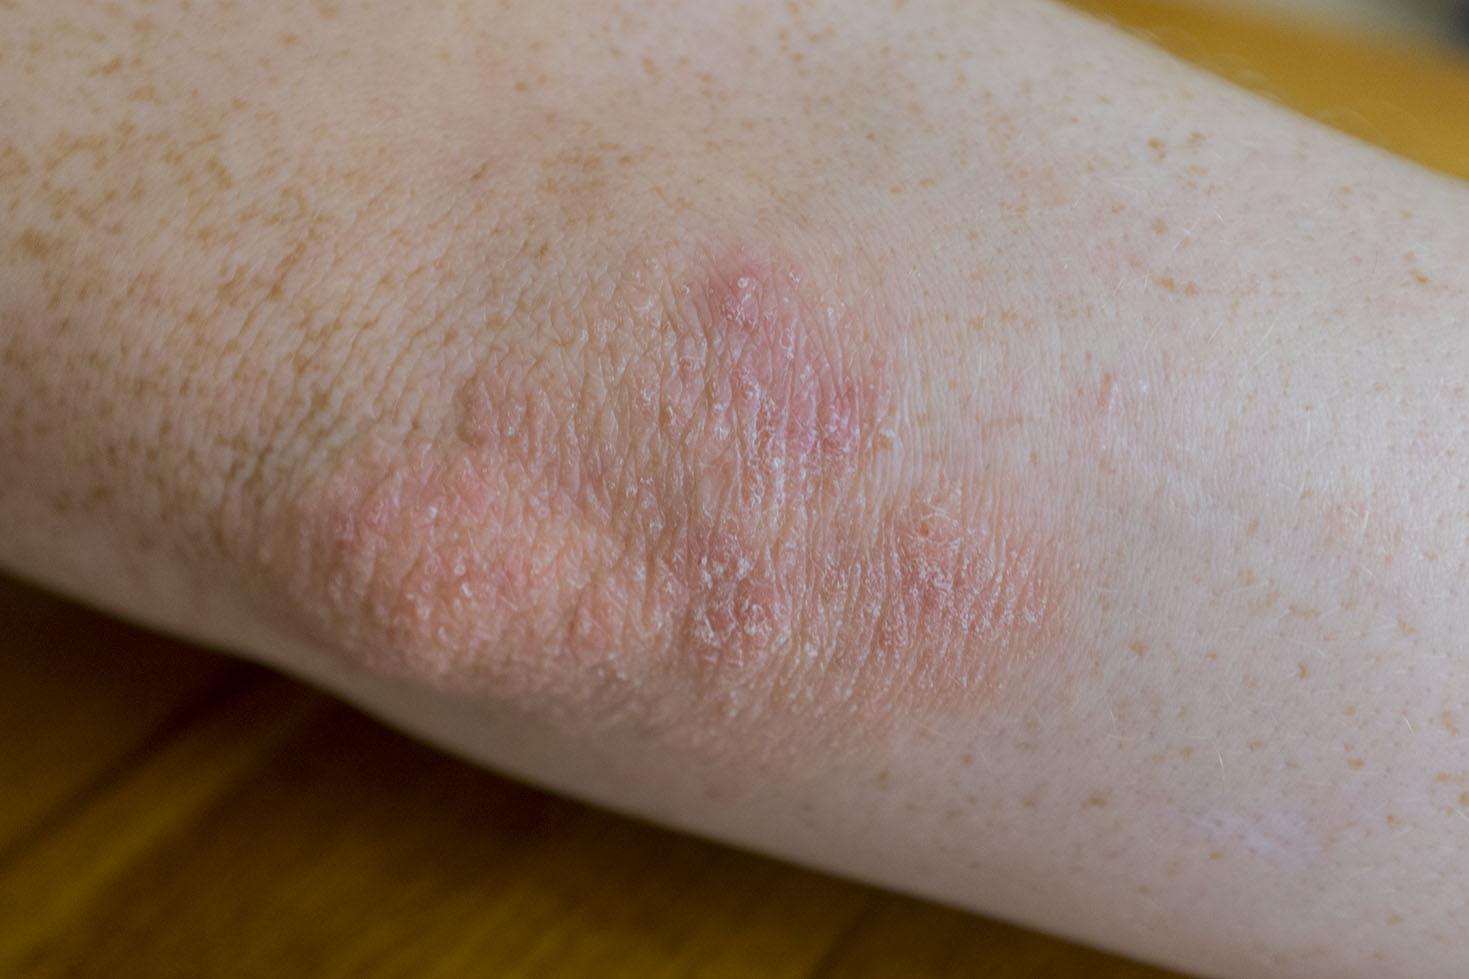 psoriasis. on an elbow